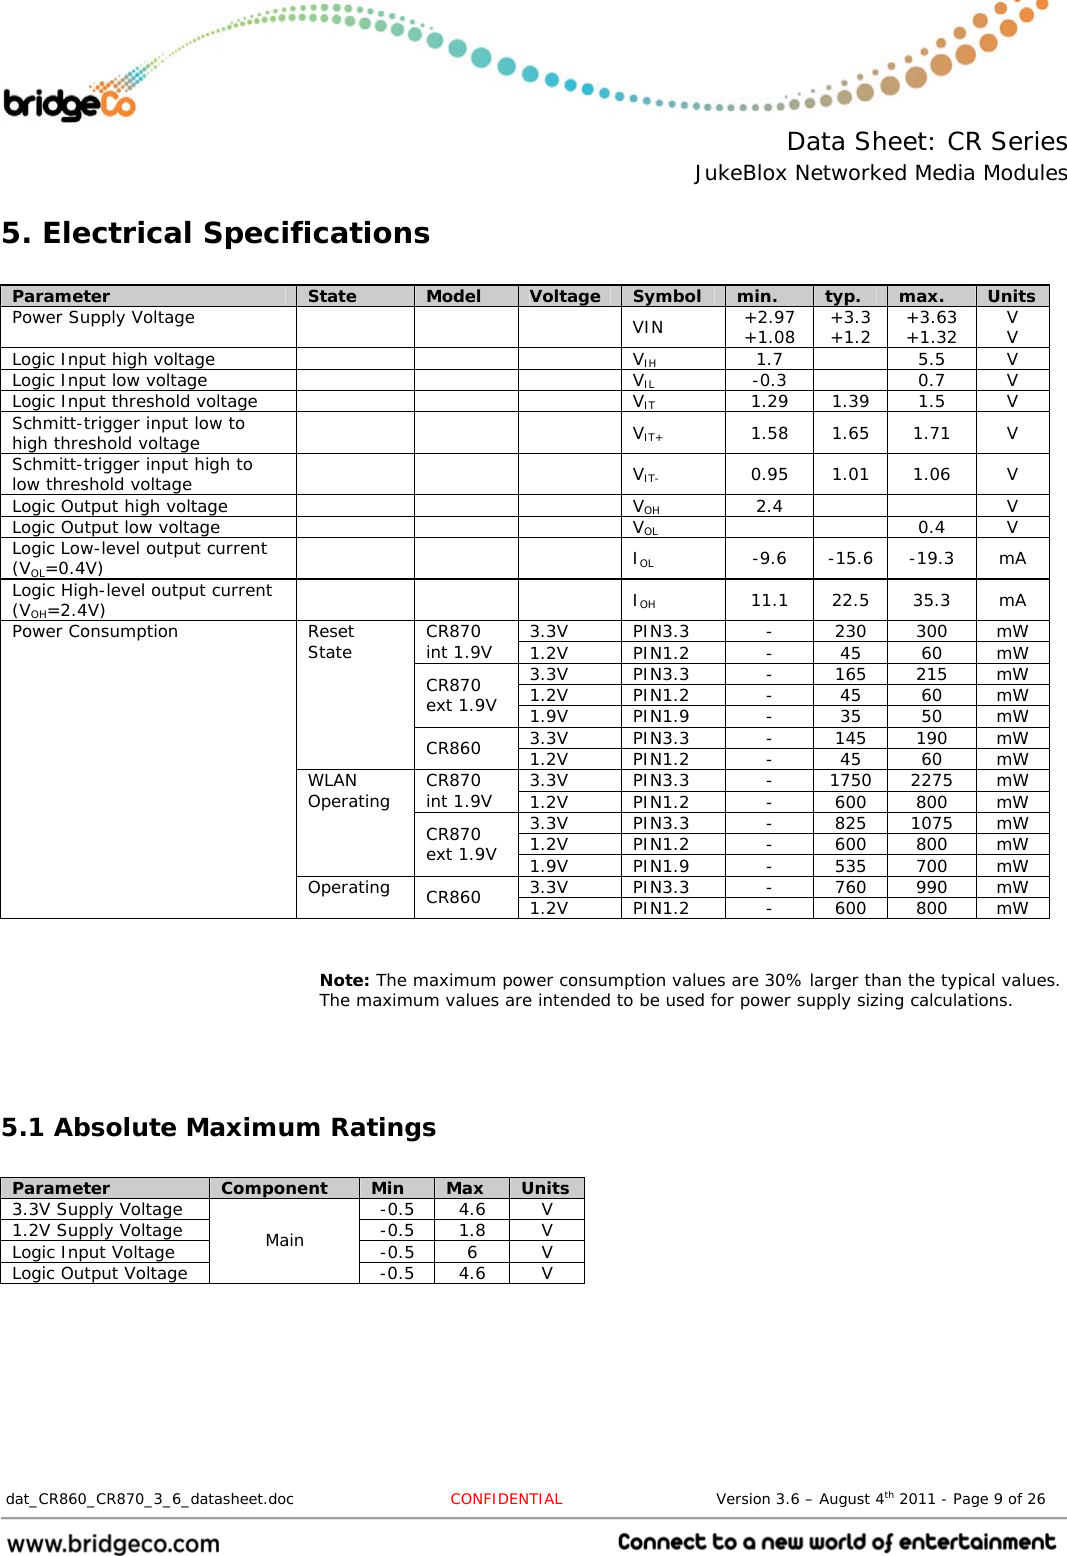  Data Sheet: CR Series JukeBlox Networked Media Modules  dat_CR860_CR870_3_6_datasheet.doc  CONFIDENTIAL                              Version 3.6 – August 4th 2011 - Page 9 of 26                                 5. Electrical Specifications  Parameter  State  Model  Voltage  Symbol  min.  typ.  max.  Units Power Supply Voltage        VIN  +2.97 +1.08  +3.3 +1.2  +3.63 +1.32  V V Logic Input high voltage        VIH 1.7  5.5 V Logic Input low voltage        VIL -0.3  0.7 V Logic Input threshold voltage        VIT 1.29 1.39 1.5 V Schmitt-trigger input low to high threshold voltage     VIT+ 1.58 1.65 1.71 V Schmitt-trigger input high to low threshold voltage     VIT- 0.95 1.01 1.06 V Logic Output high voltage        VOH 2.4   V Logic Output low voltage        VOL   0.4 V Logic Low-level output current (VOL=0.4V)     IOL -9.6 -15.6 -19.3 mA Logic High-level output current (VOH=2.4V)     IOH 11.1 22.5 35.3 mA 3.3V PIN3.3  - 230 300 mW CR870 int 1.9V  1.2V PIN1.2  - 45 60 mW 3.3V PIN3.3  - 165 215 mW 1.2V PIN1.2  - 45 60 mW CR870 ext 1.9V  1.9V PIN1.9  - 35 50 mW 3.3V PIN3.3  - 145 190 mW Reset State CR860  1.2V PIN1.2  - 45 60 mW 3.3V PIN3.3  - 1750 2275 mW CR870 int 1.9V  1.2V PIN1.2  - 600 800 mW 3.3V PIN3.3  - 825 1075 mW 1.2V PIN1.2  - 600 800 mW WLAN Operating CR870 ext 1.9V  1.9V PIN1.9  - 535 700 mW 3.3V PIN3.3  - 760 990 mW Power Consumption Operating  CR860  1.2V PIN1.2  - 600 800 mW   Note: The maximum power consumption values are 30% larger than the typical values. The maximum values are intended to be used for power supply sizing calculations.   5.1 Absolute Maximum Ratings  Parameter  Component  Min  Max  Units 3.3V Supply Voltage  -0.5  4.6  V 1.2V Supply Voltage  -0.5  1.8  V Logic Input Voltage  -0.5  6  V Logic Output Voltage Main -0.5 4.6  V  